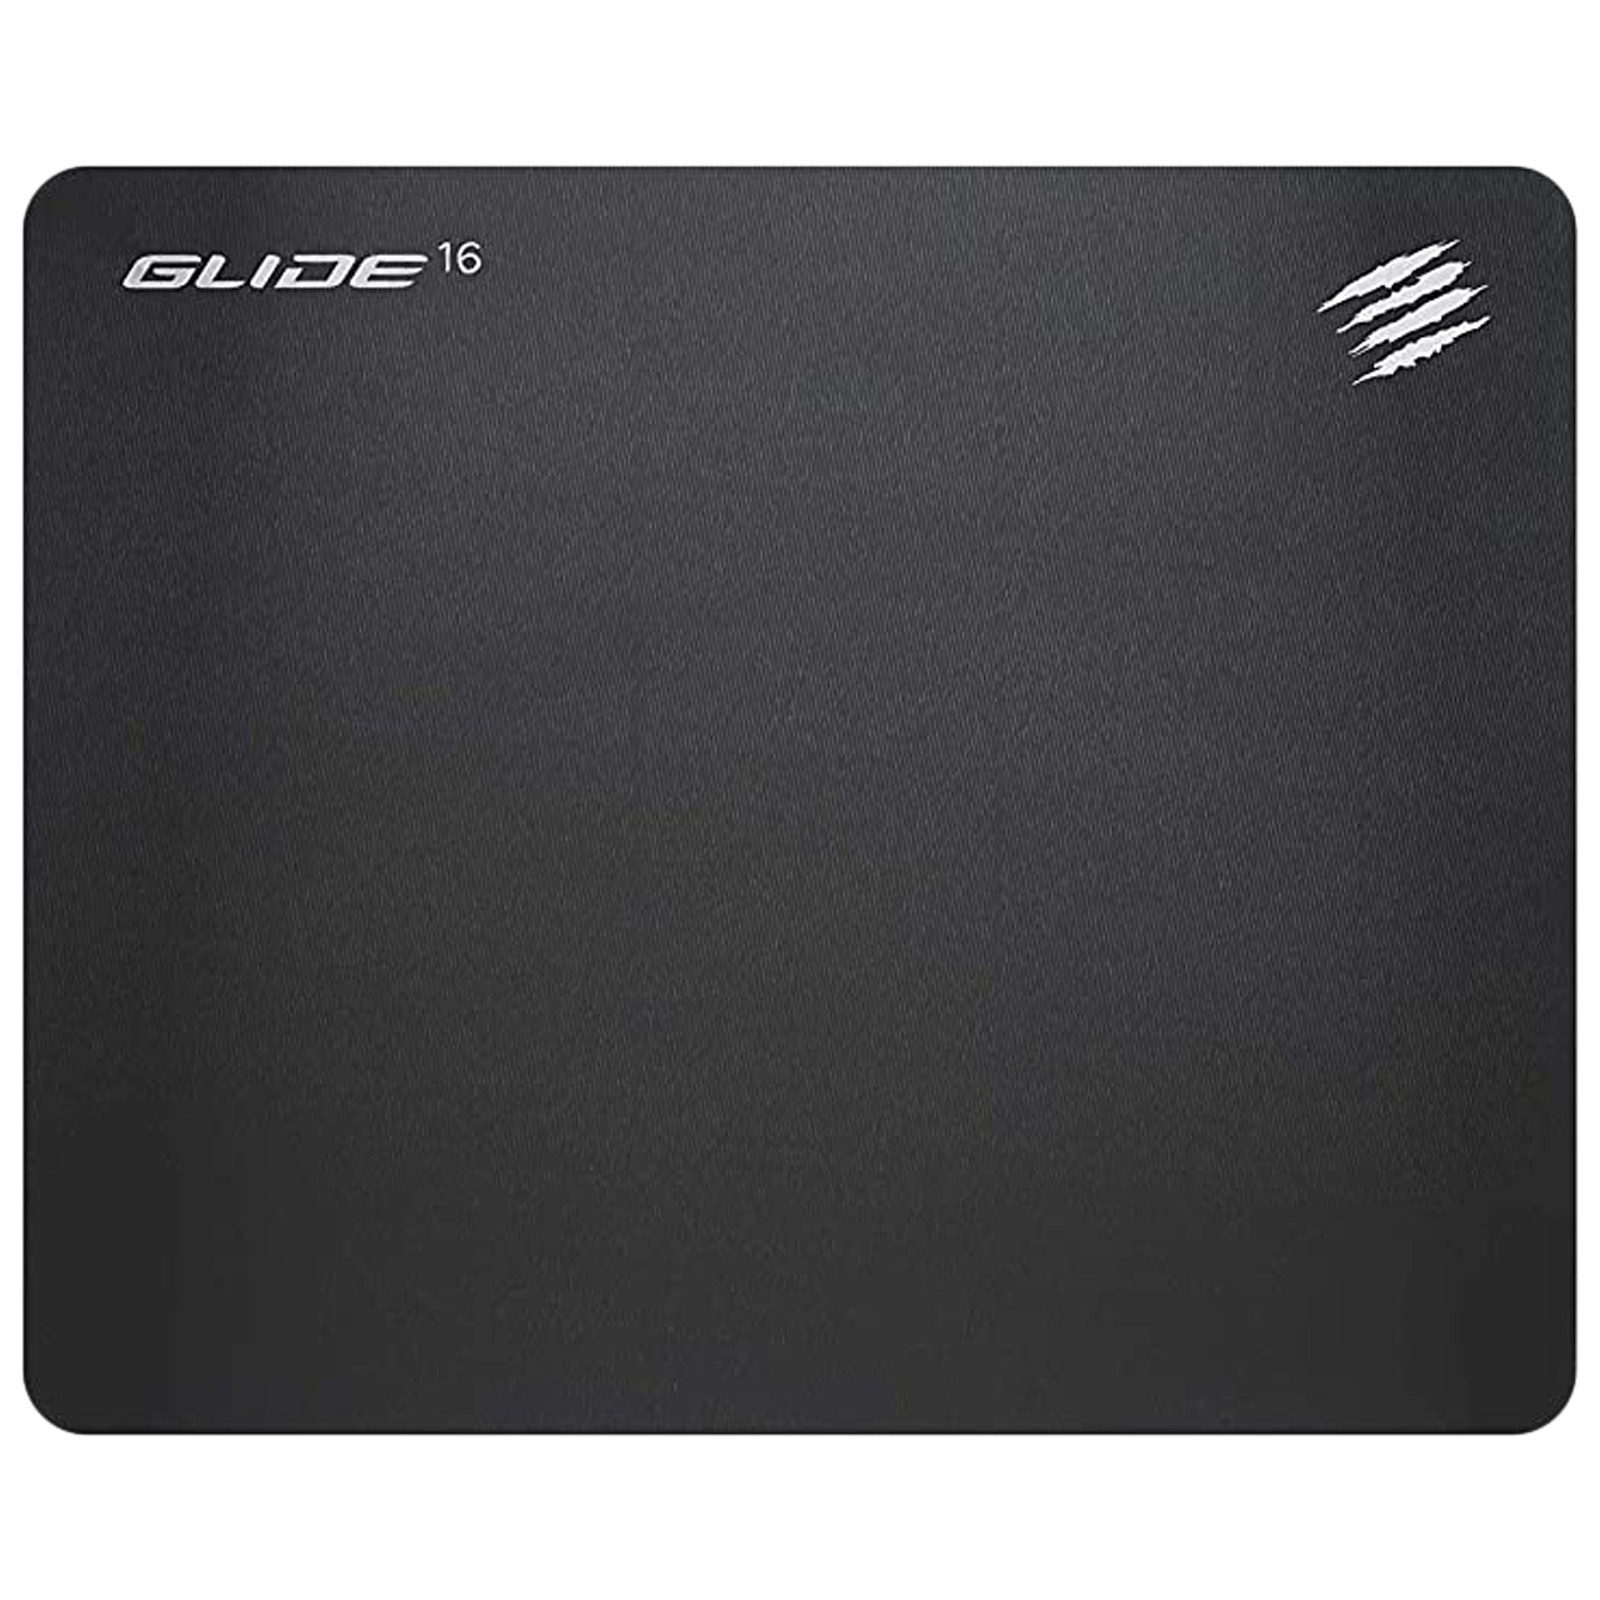 MAD CATZ The Authentic G.L.I.D.E. 16 Mouse Pad For Desktop and Laptop (Smooth Low Friction Surface, SGSNNS16BL000-0, Black)